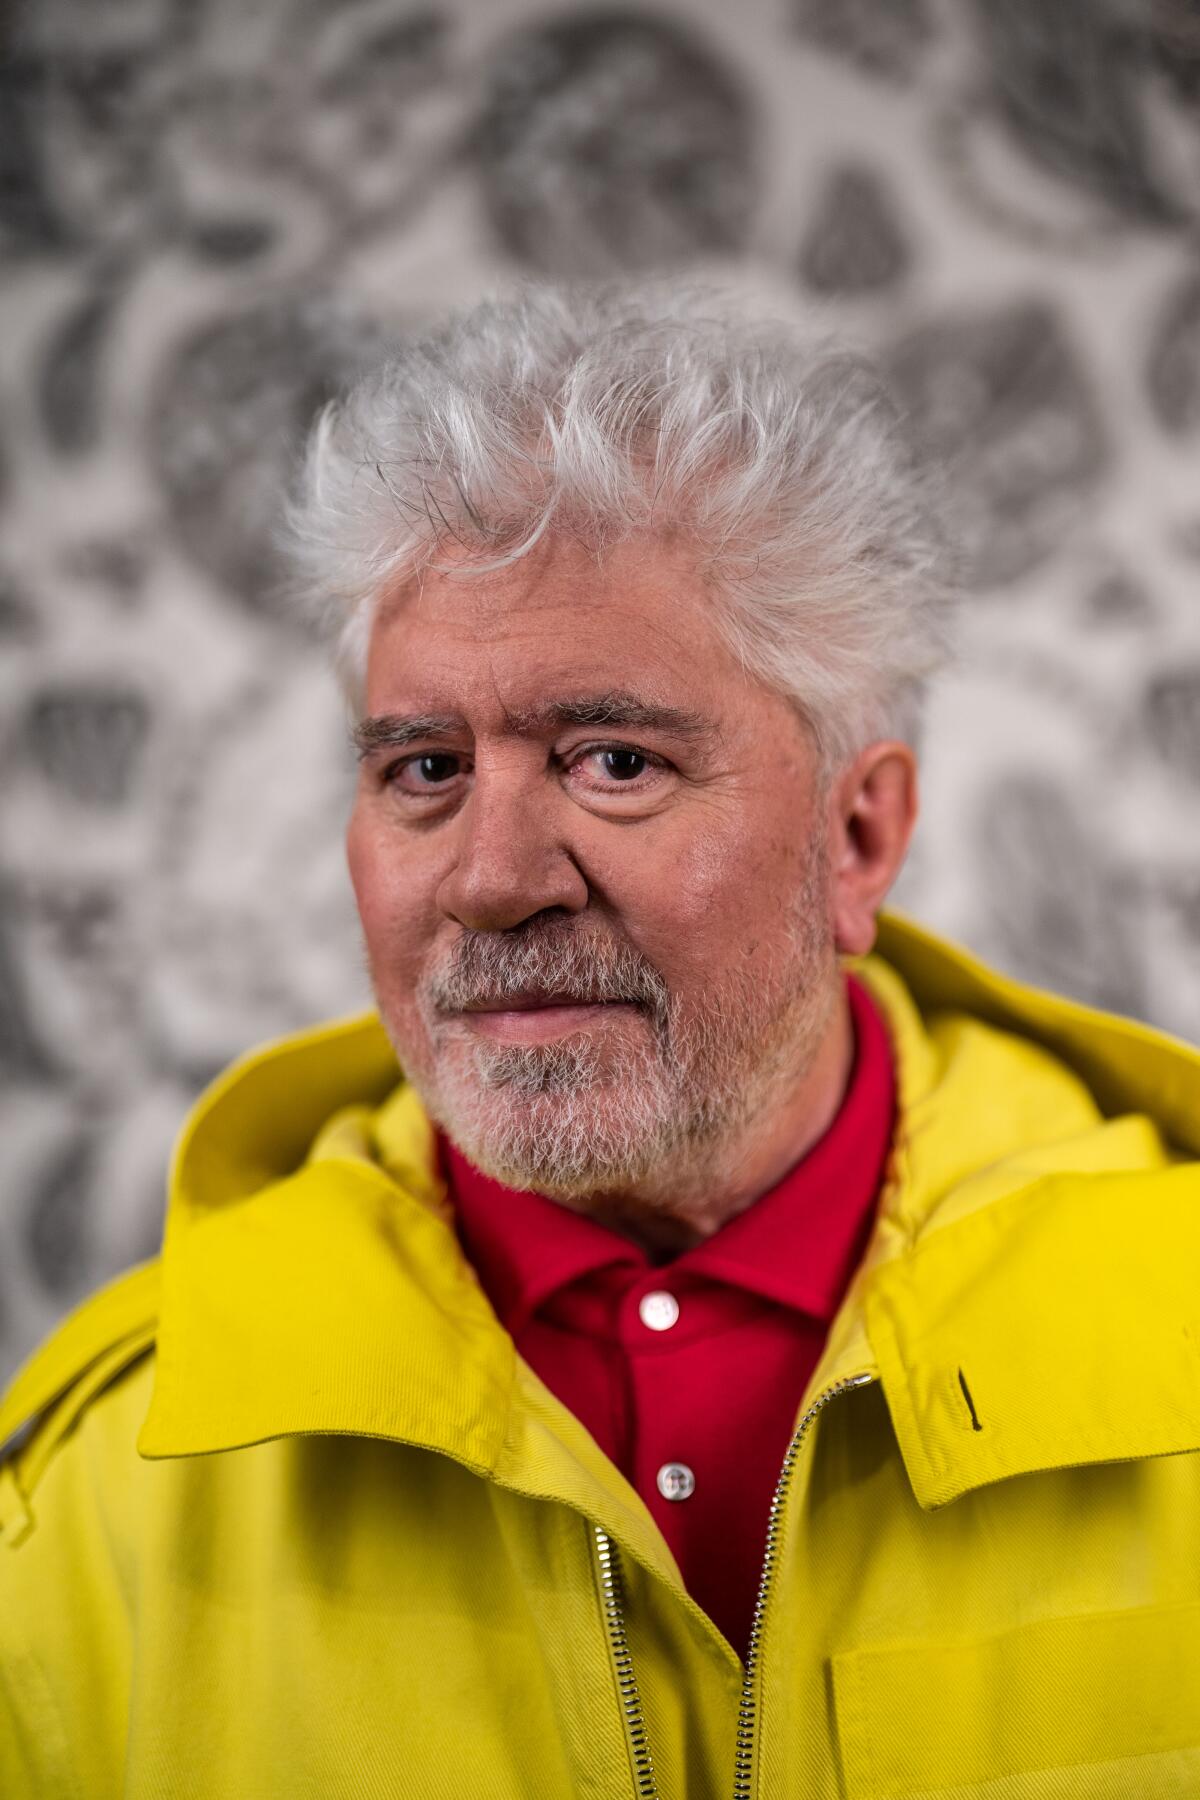 A man with white hair and a beard poses in a bright yellow jacket over a red polo shirt.